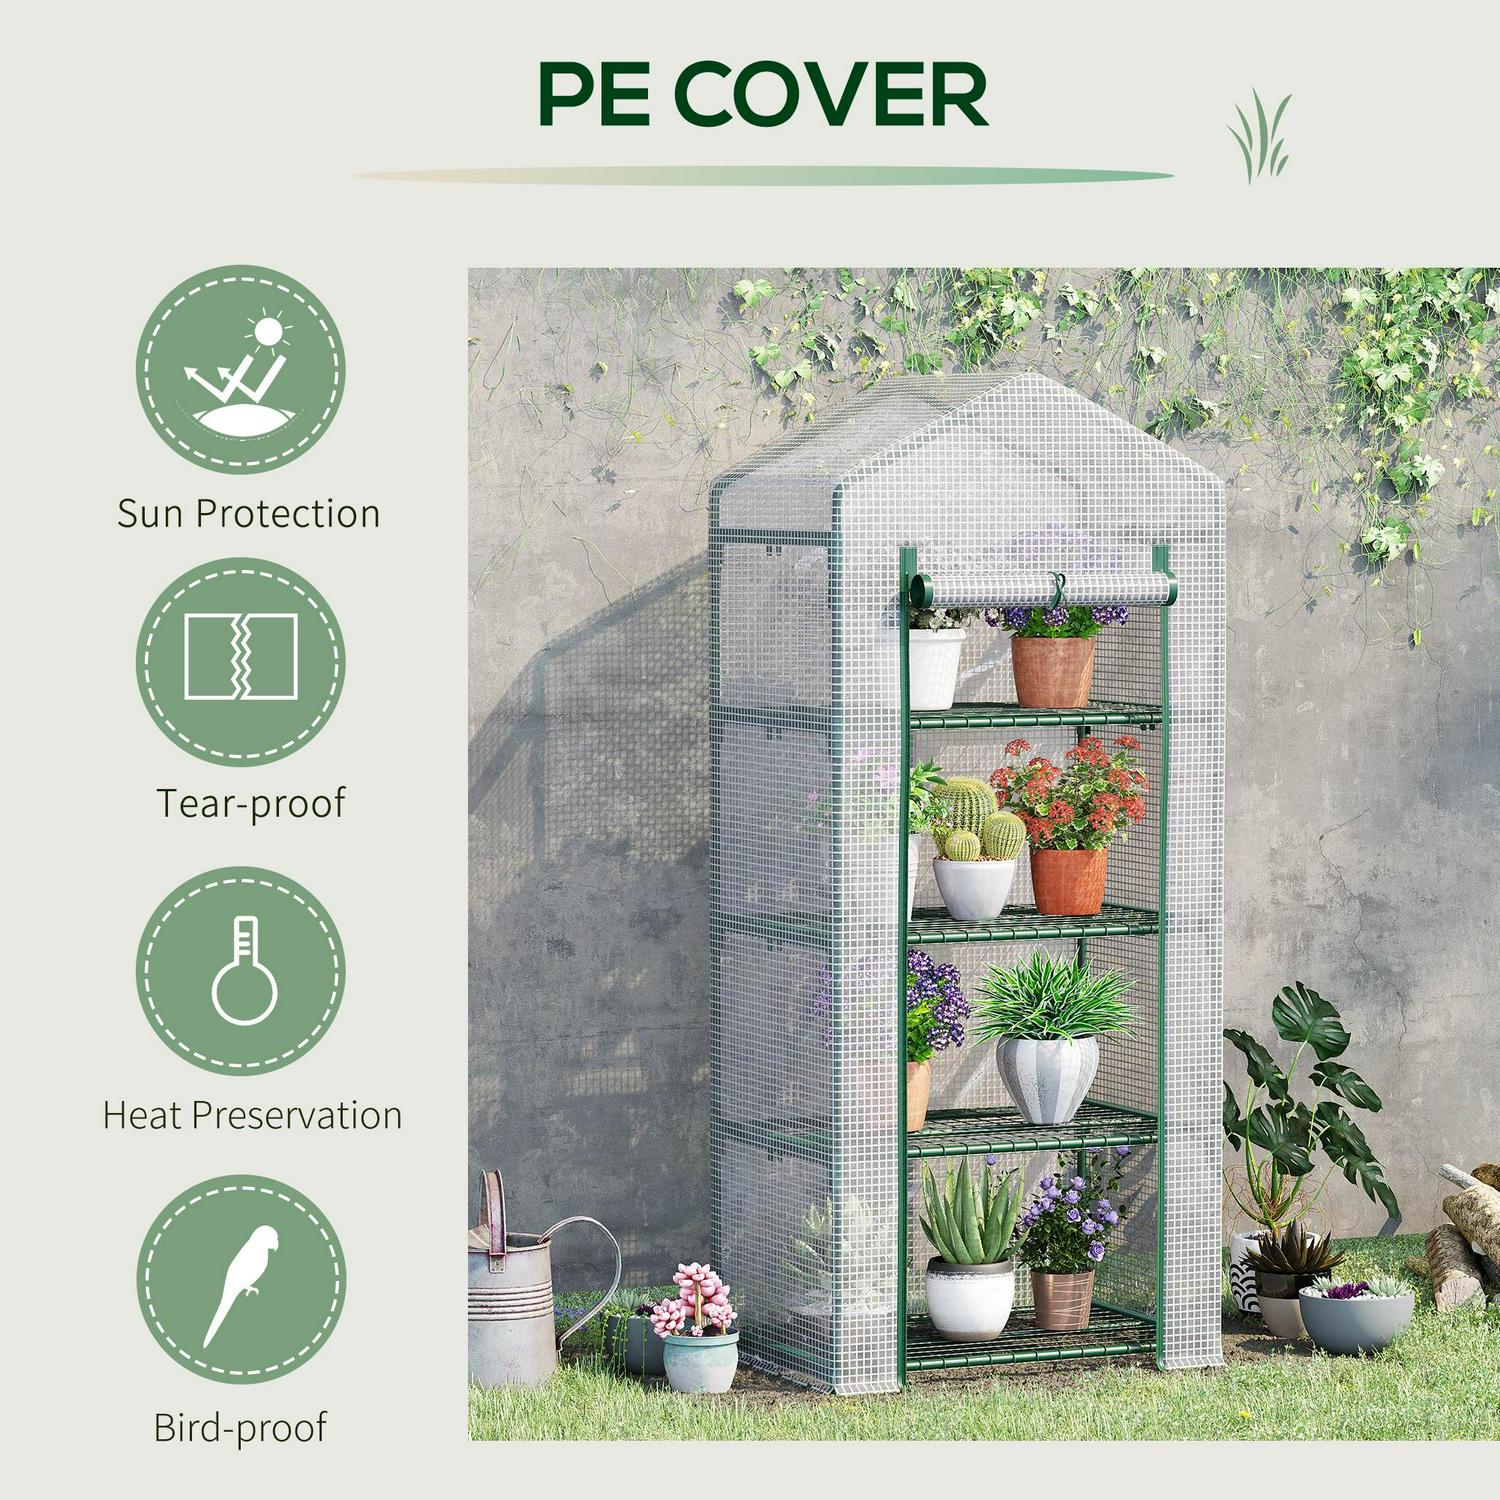 4-Tier Portable Greenhouse Plant Shed With PE Cover Roll-up Door, White